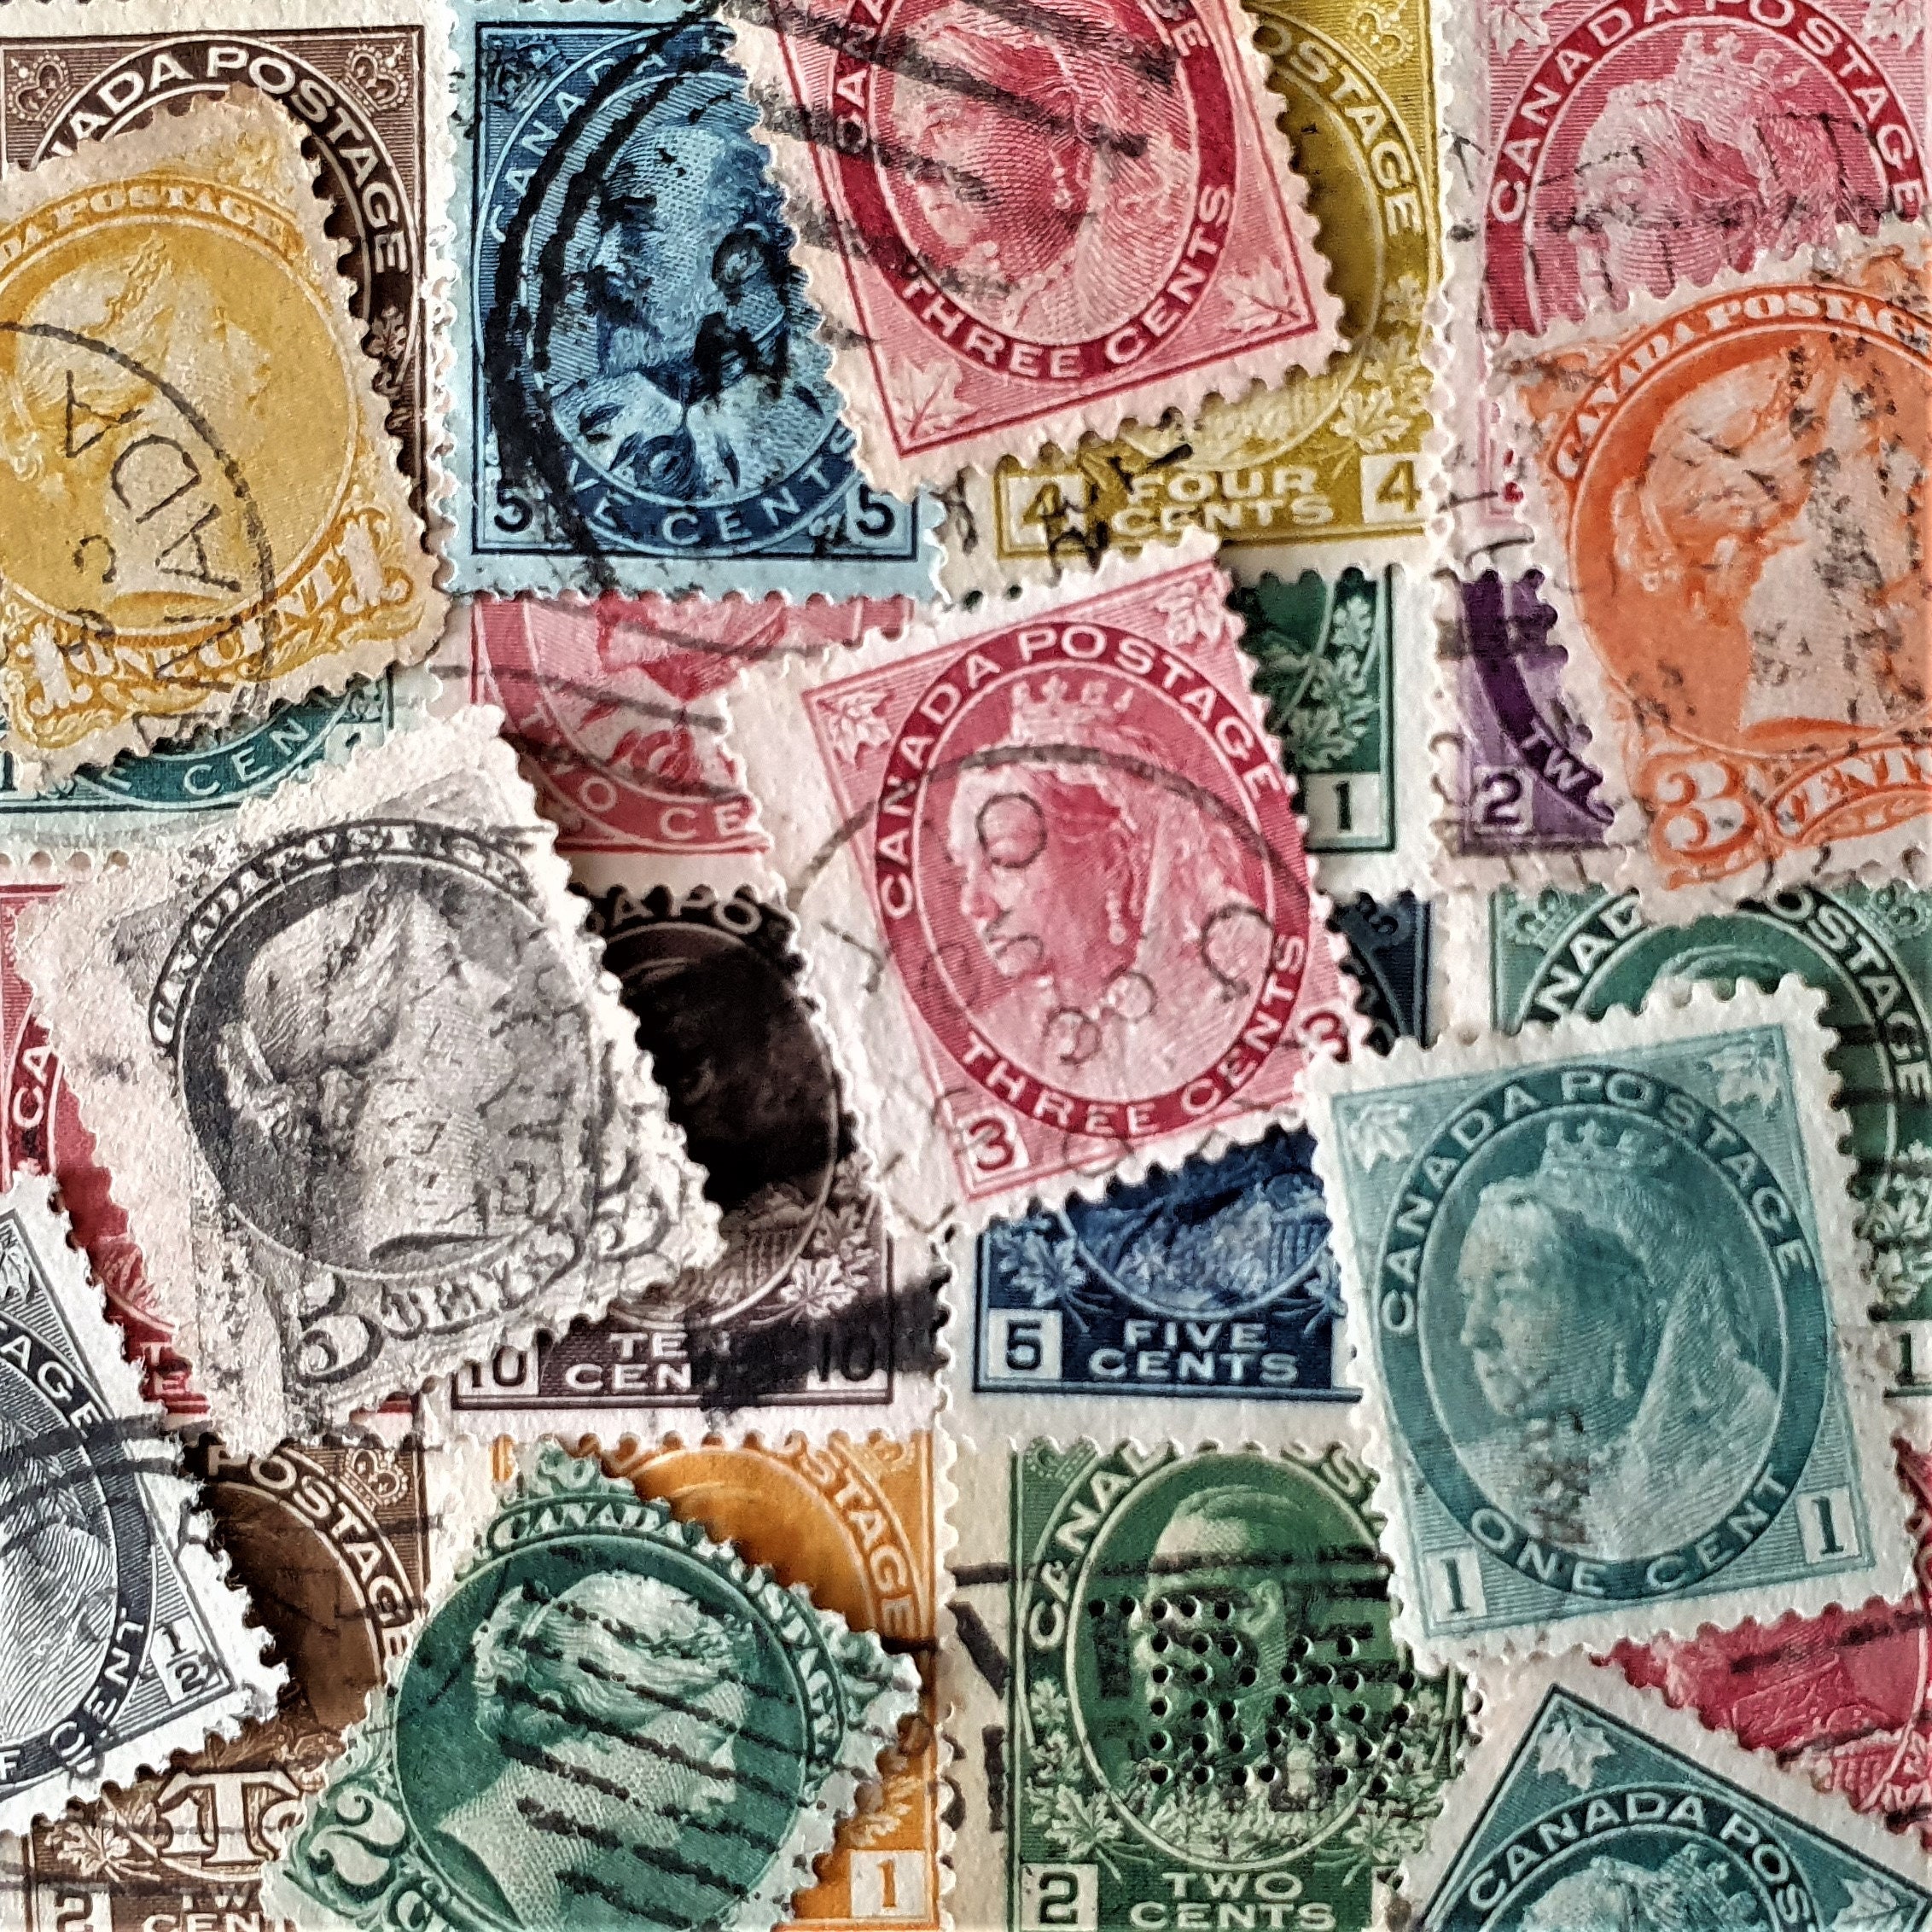 15x Vintage INDIAN Stamps, Old Used Mail Postal Stamps From India Set Post  Collectible Junk Journal Scrapbook Ephemera Collage Art Supply 